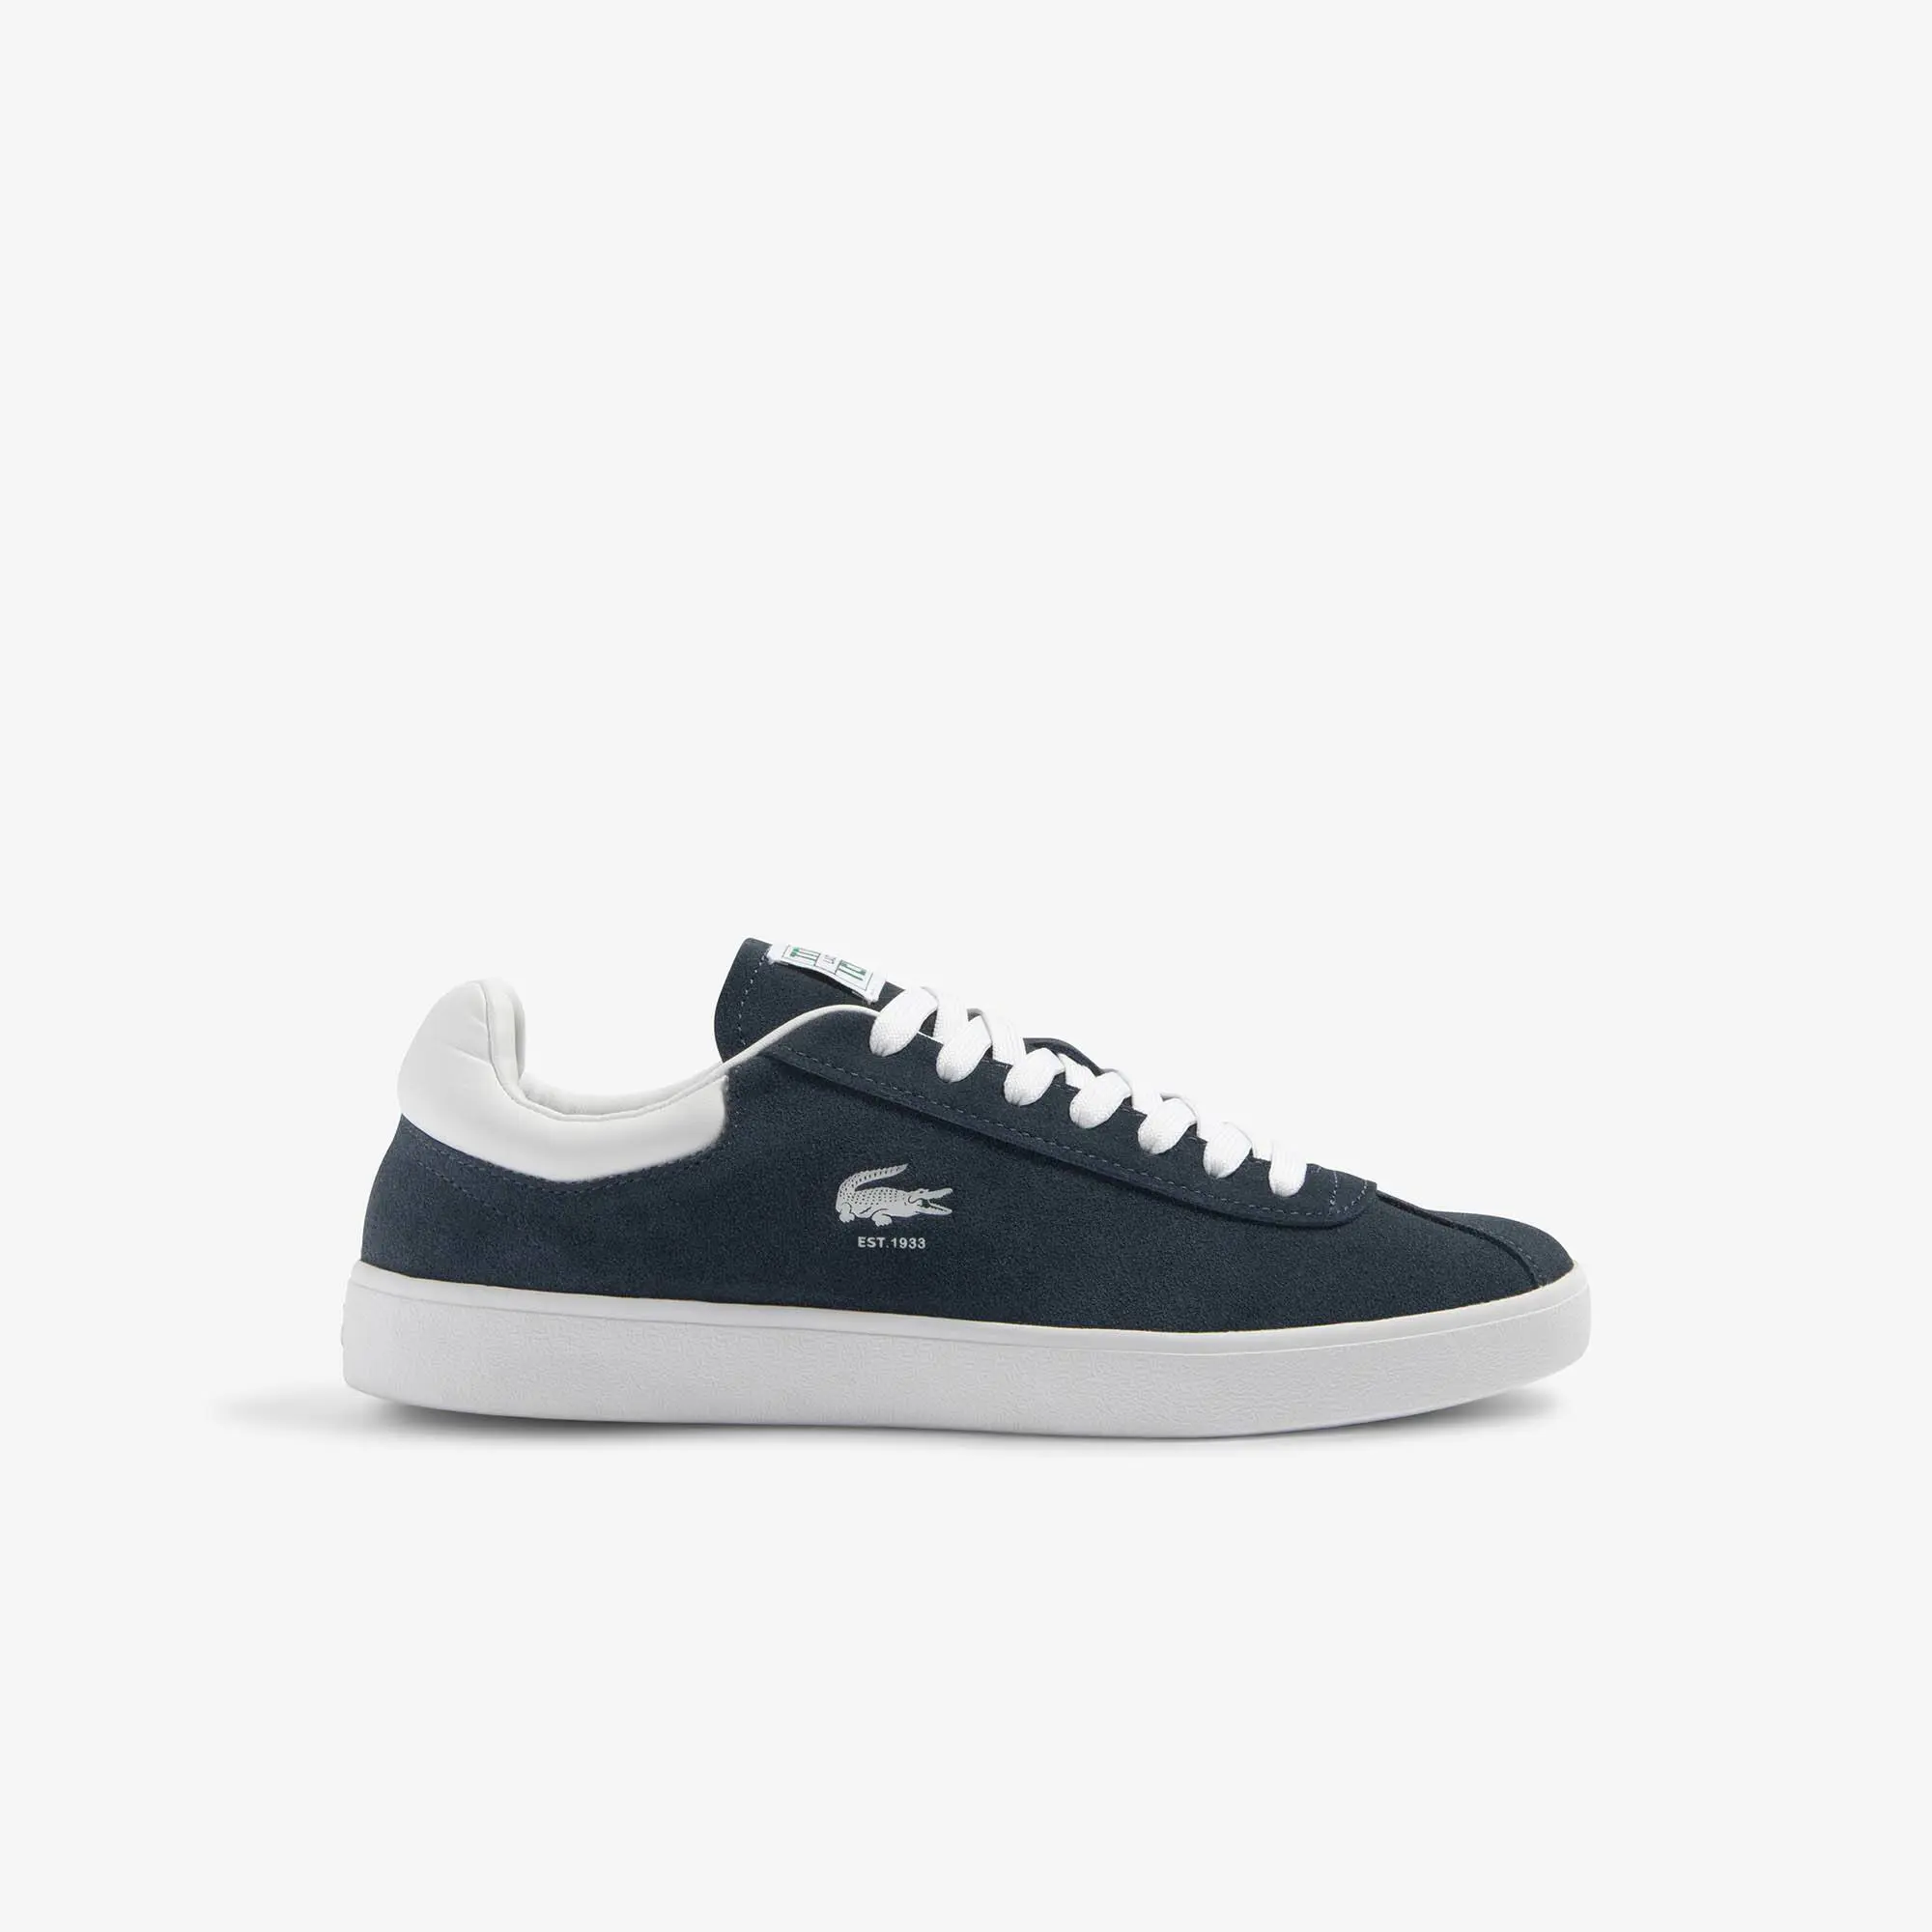 Lacoste Men's Baseshot Suede Trainers. 1